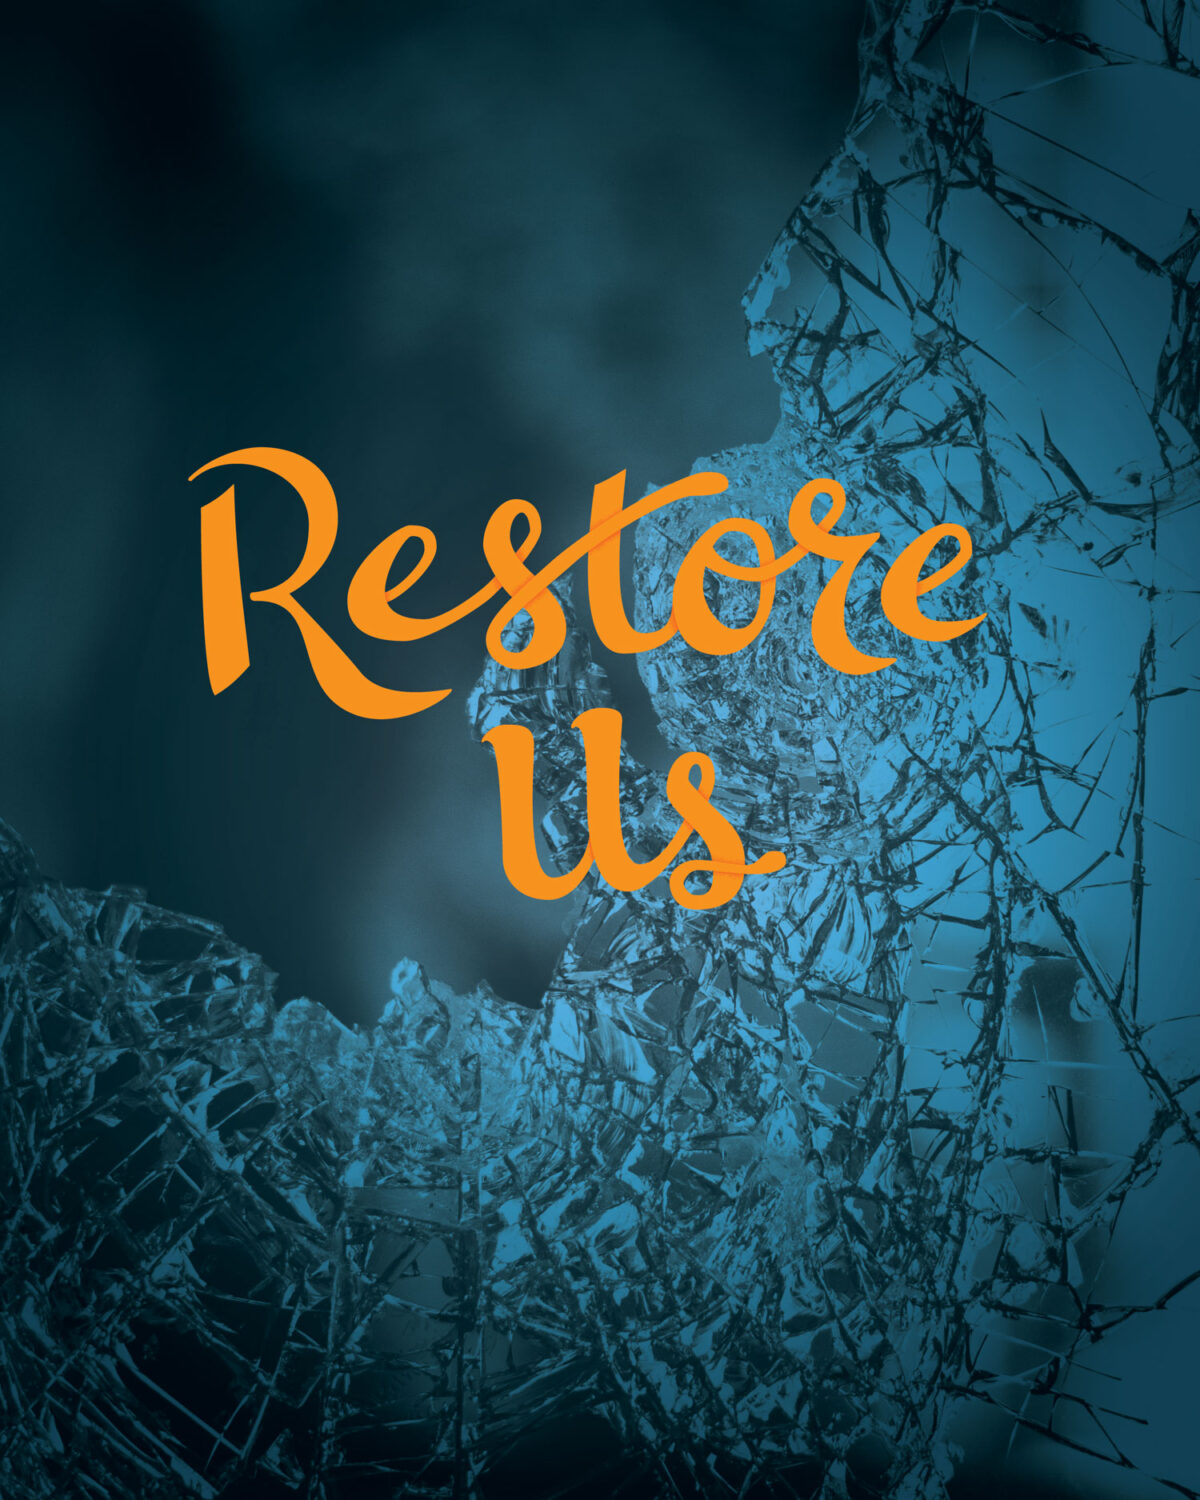 Psalm 60 Hand Lettering that reads restore us, overlaid on an image of broken glass.